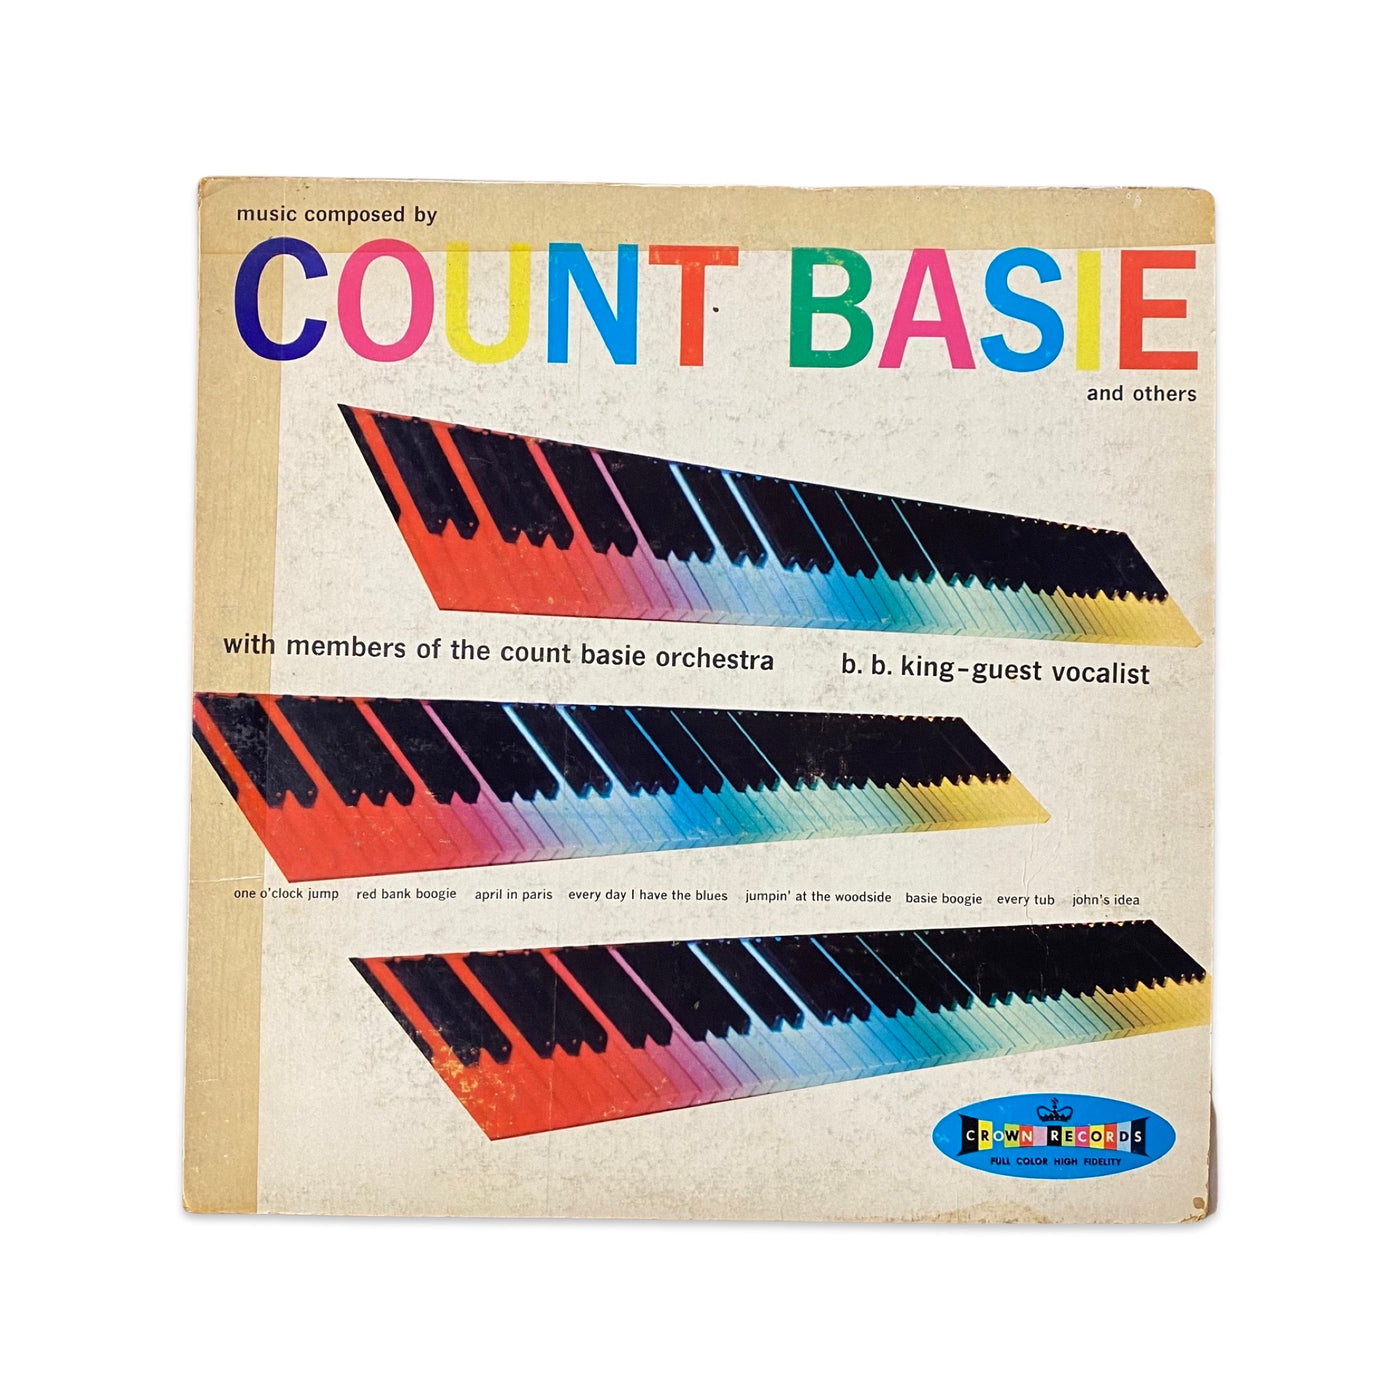 Count Basie - Compositions Of Count Basie And Others